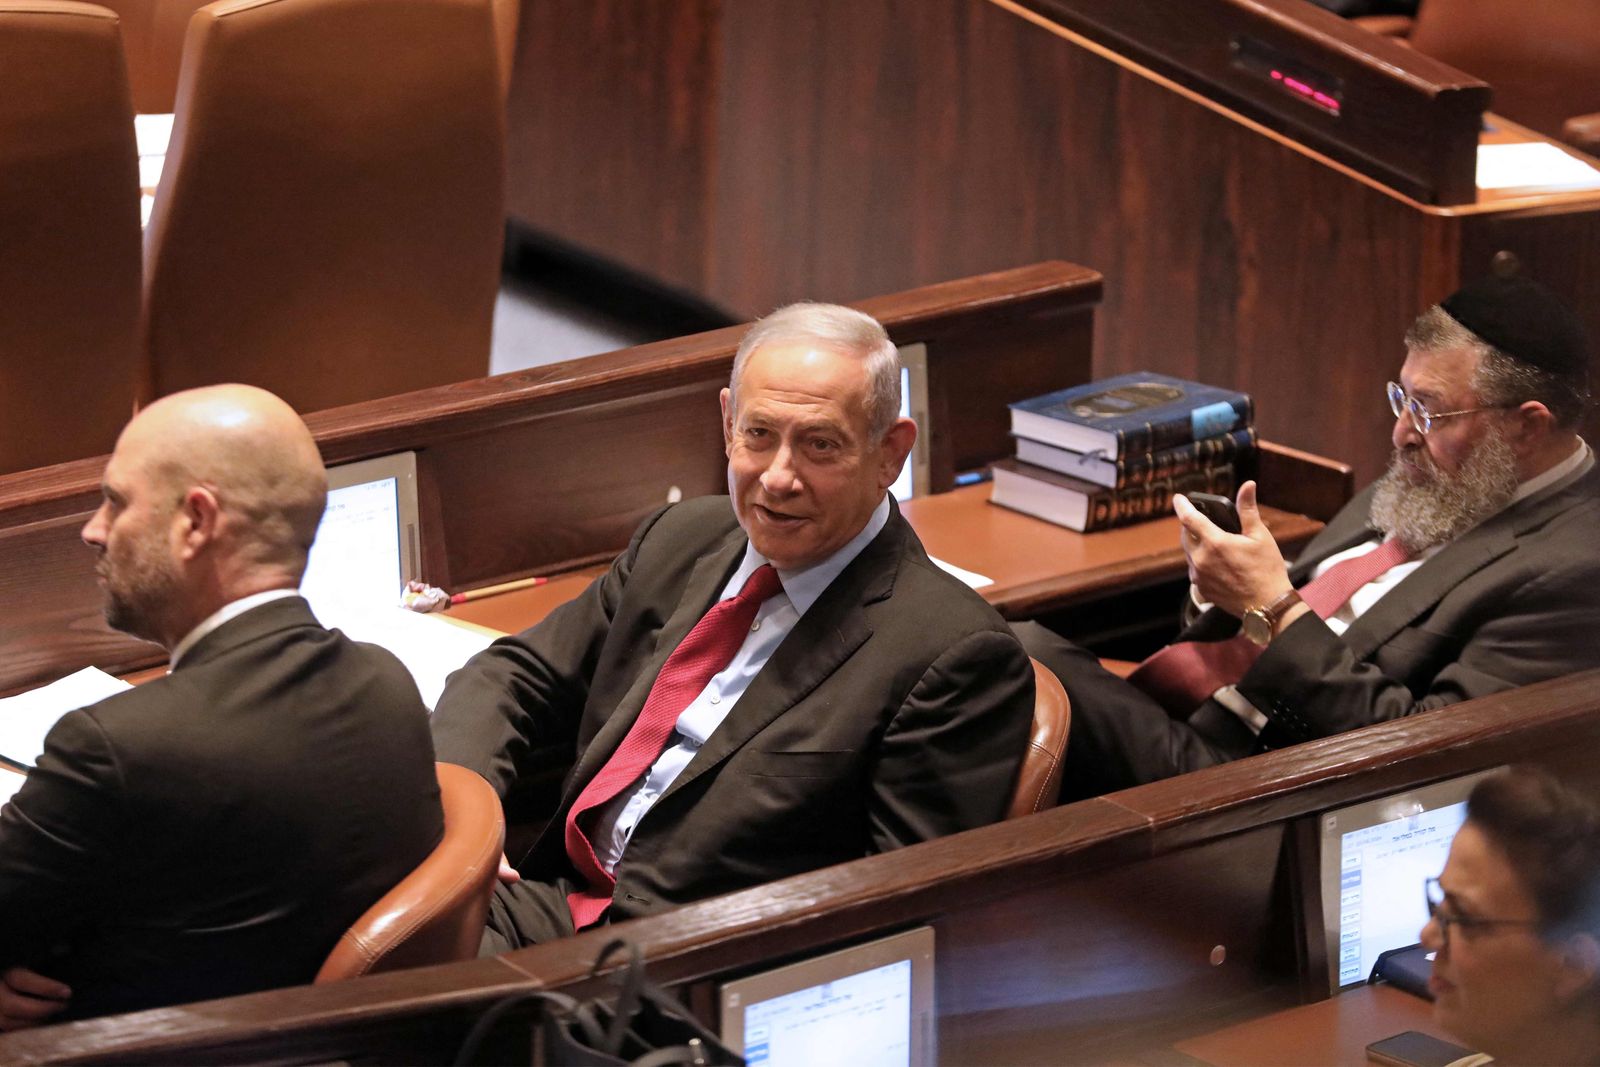 Israeli former premier Benjamin Netanyahu attends a preliminary vote on a bill to dissolve parliament and call an early election, at the Knesset in Jerusalem on June 22, 2022. - The government has said it wants to fast-track the bill but the opposition led by ex-premier Benjamin Netanyahu will attempt to block its passage in a bid to form a replacement government without the need for what would be Israel's fifth election in less than four years. (Photo by GIL COHEN-MAGEN / AFP) - AFP